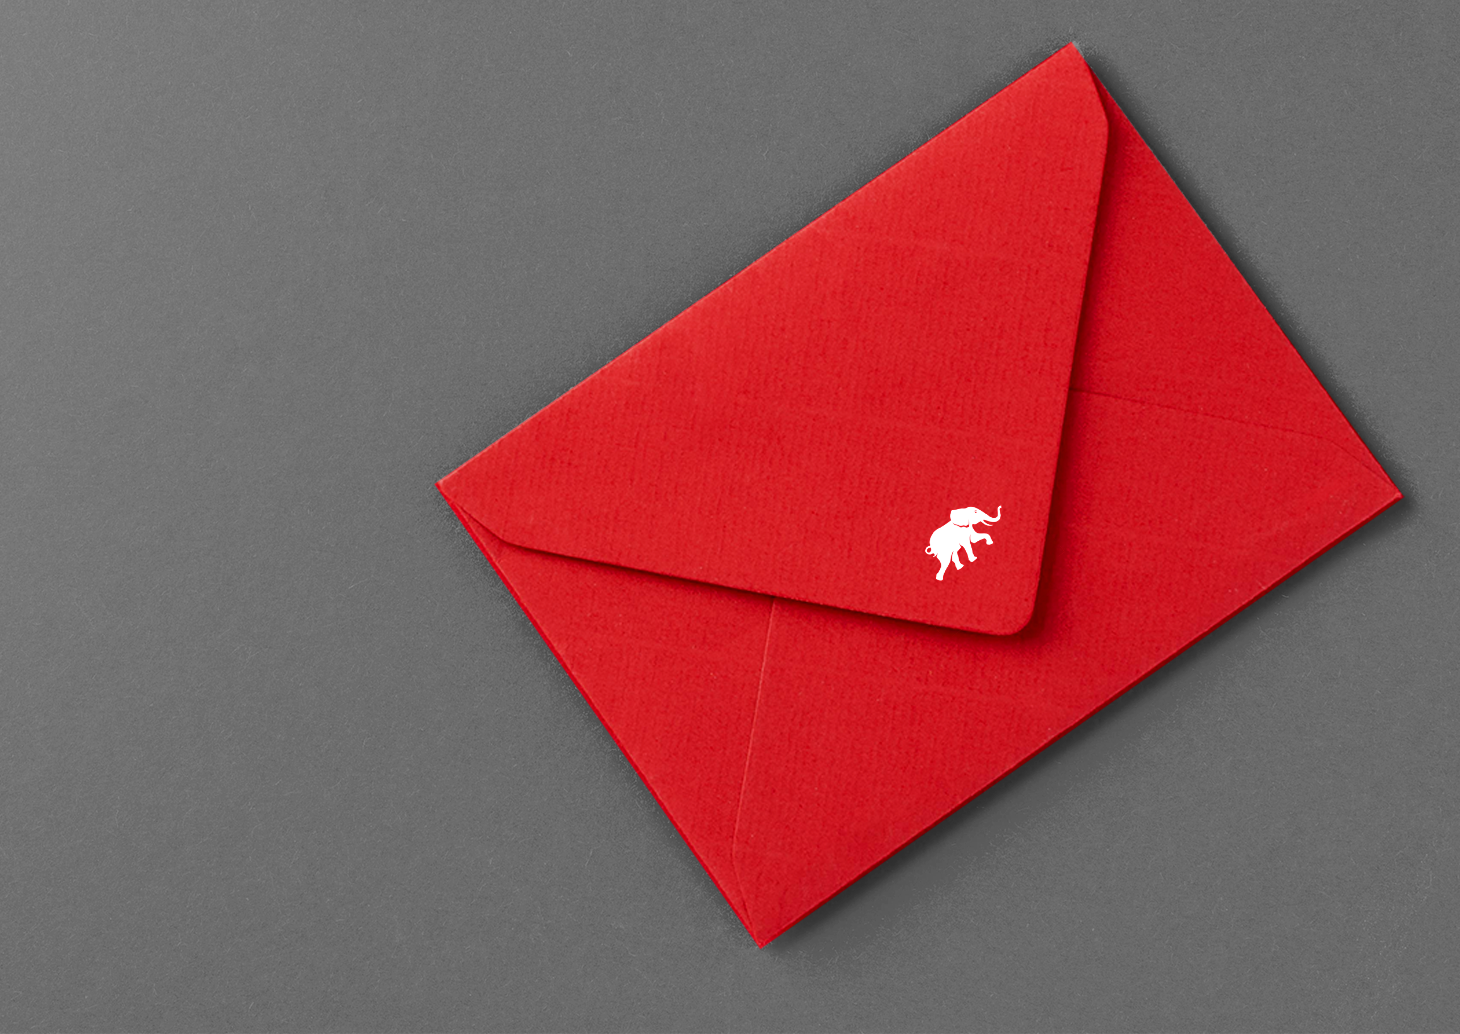 Red envelope with Typhoon HIL logo.